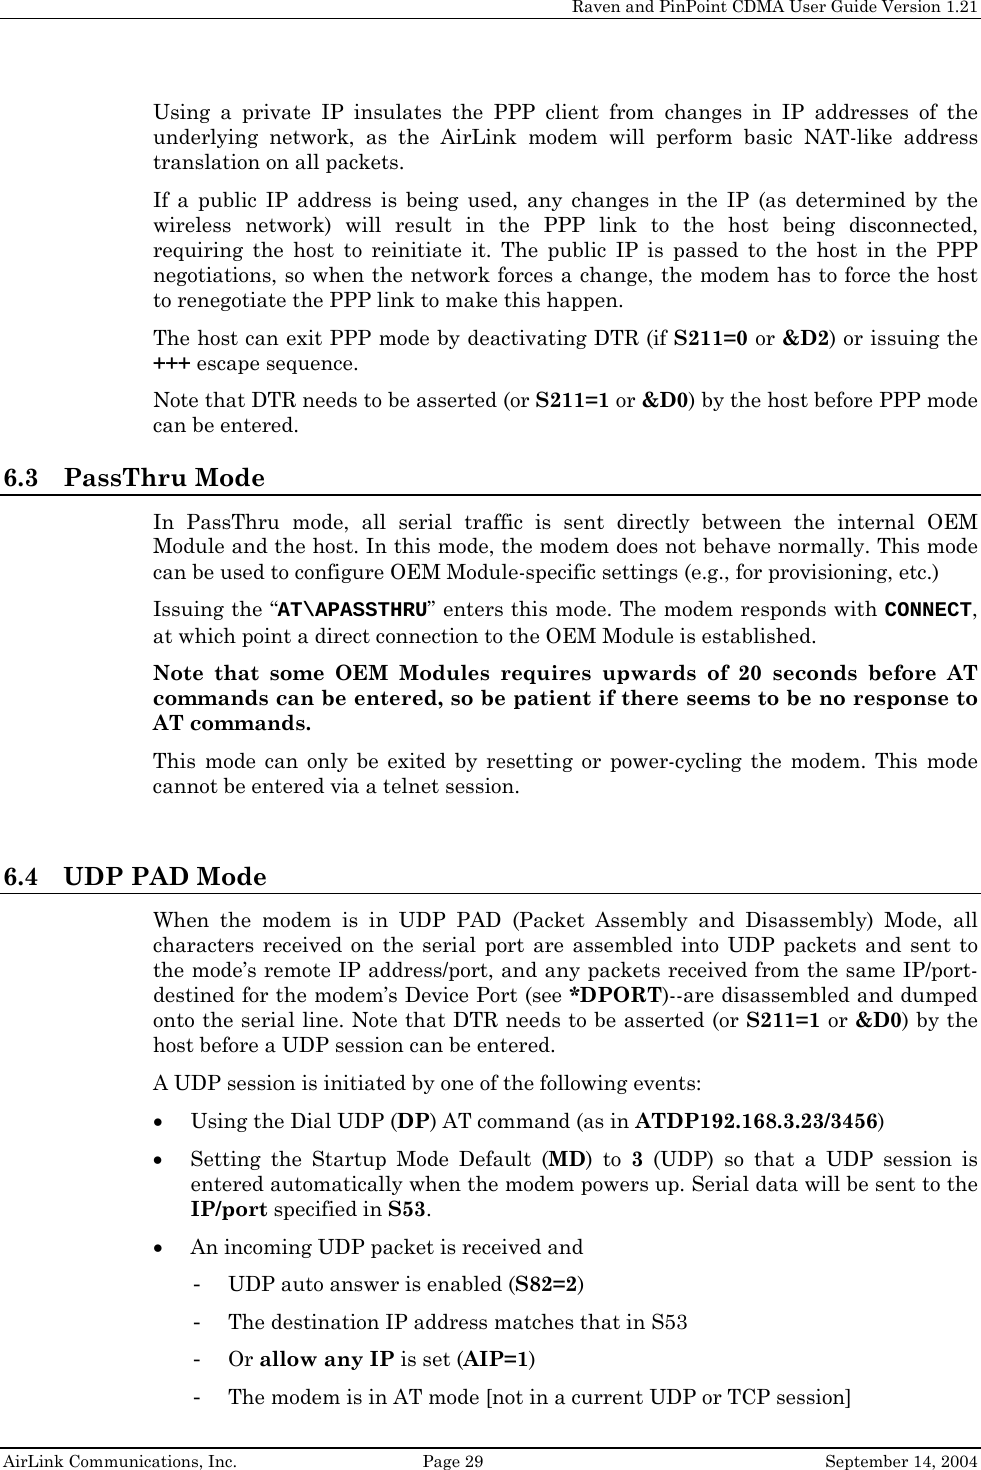     Raven and PinPoint CDMA User Guide Version 1.21  AirLink Communications, Inc.  Page 29  September 14, 2004 Using a private IP insulates the PPP client from changes in IP addresses of the underlying network, as the AirLink modem will perform basic NAT-like address translation on all packets.  If a public IP address is being used, any changes in the IP (as determined by the wireless network) will result in the PPP link to the host being disconnected, requiring the host to reinitiate it. The public IP is passed to the host in the PPP negotiations, so when the network forces a change, the modem has to force the host to renegotiate the PPP link to make this happen. The host can exit PPP mode by deactivating DTR (if S211=0 or &amp;D2) or issuing the +++ escape sequence. Note that DTR needs to be asserted (or S211=1 or &amp;D0) by the host before PPP mode can be entered. 6.3 PassThru Mode In PassThru mode, all serial traffic is sent directly between the internal OEM Module and the host. In this mode, the modem does not behave normally. This mode can be used to configure OEM Module-specific settings (e.g., for provisioning, etc.) Issuing the “AT\APASSTHRU” enters this mode. The modem responds with CONNECT, at which point a direct connection to the OEM Module is established.  Note that some OEM Modules requires upwards of 20 seconds before AT commands can be entered, so be patient if there seems to be no response to AT commands. This mode can only be exited by resetting or power-cycling the modem. This mode cannot be entered via a telnet session.  6.4 UDP PAD Mode When the modem is in UDP PAD (Packet Assembly and Disassembly) Mode, all characters received on the serial port are assembled into UDP packets and sent to the mode’s remote IP address/port, and any packets received from the same IP/port-destined for the modem’s Device Port (see *DPORT)--are disassembled and dumped onto the serial line. Note that DTR needs to be asserted (or S211=1 or &amp;D0) by the host before a UDP session can be entered. A UDP session is initiated by one of the following events: • Using the Dial UDP (DP) AT command (as in ATDP192.168.3.23/3456) • Setting the Startup Mode Default (MD) to 3 (UDP) so that a UDP session is entered automatically when the modem powers up. Serial data will be sent to the IP/port specified in S53. • An incoming UDP packet is received and - UDP auto answer is enabled (S82=2) - The destination IP address matches that in S53 - Or allow any IP is set (AIP=1) - The modem is in AT mode [not in a current UDP or TCP session] 